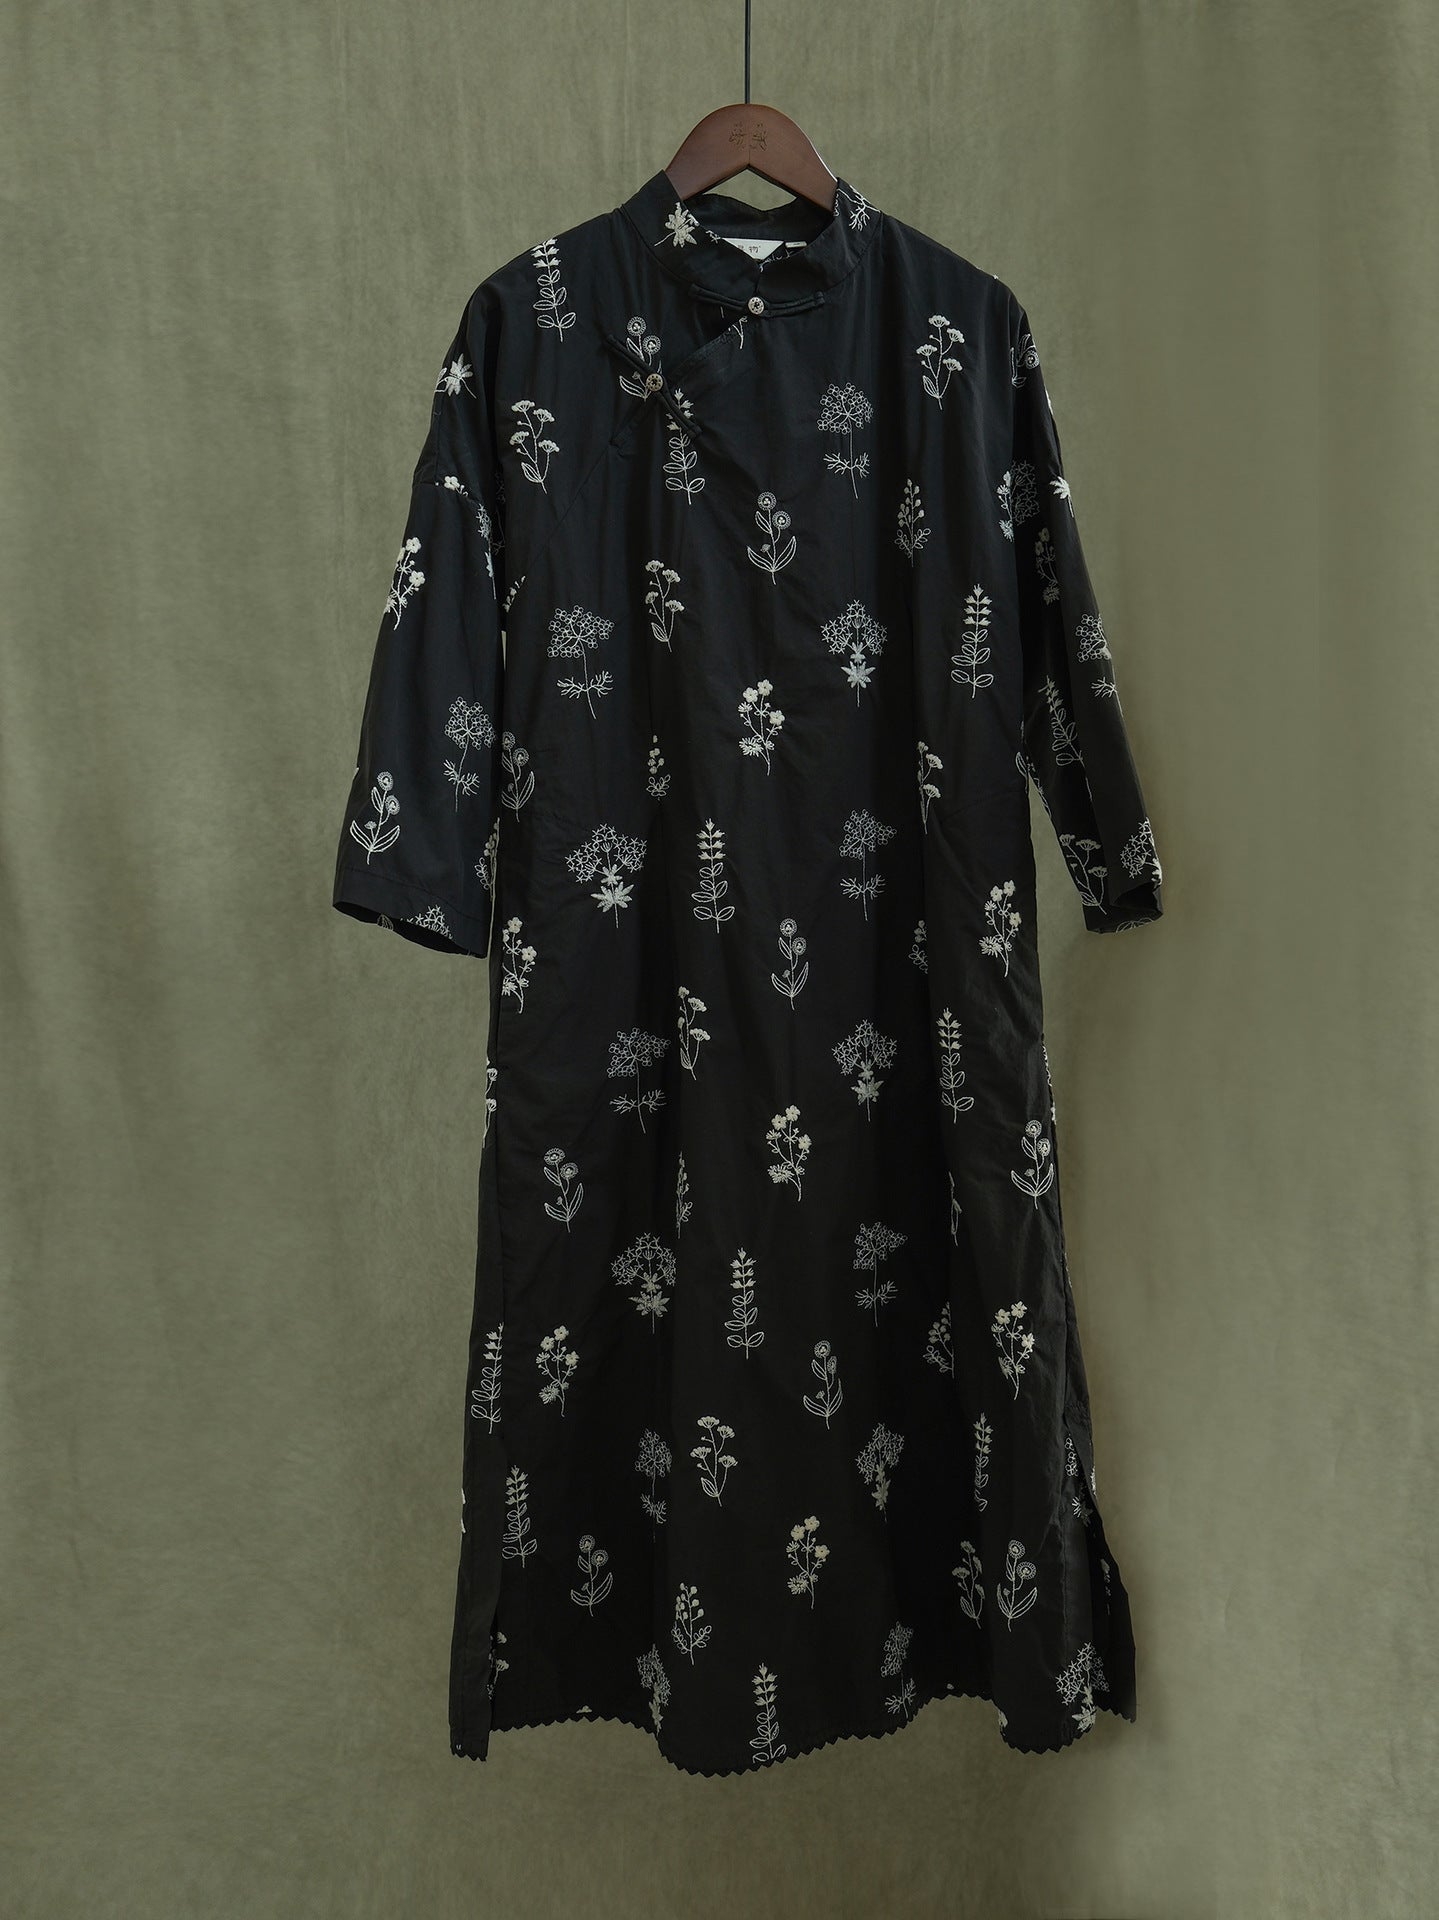 Floral Embroidered Cheongsam Dress in Black